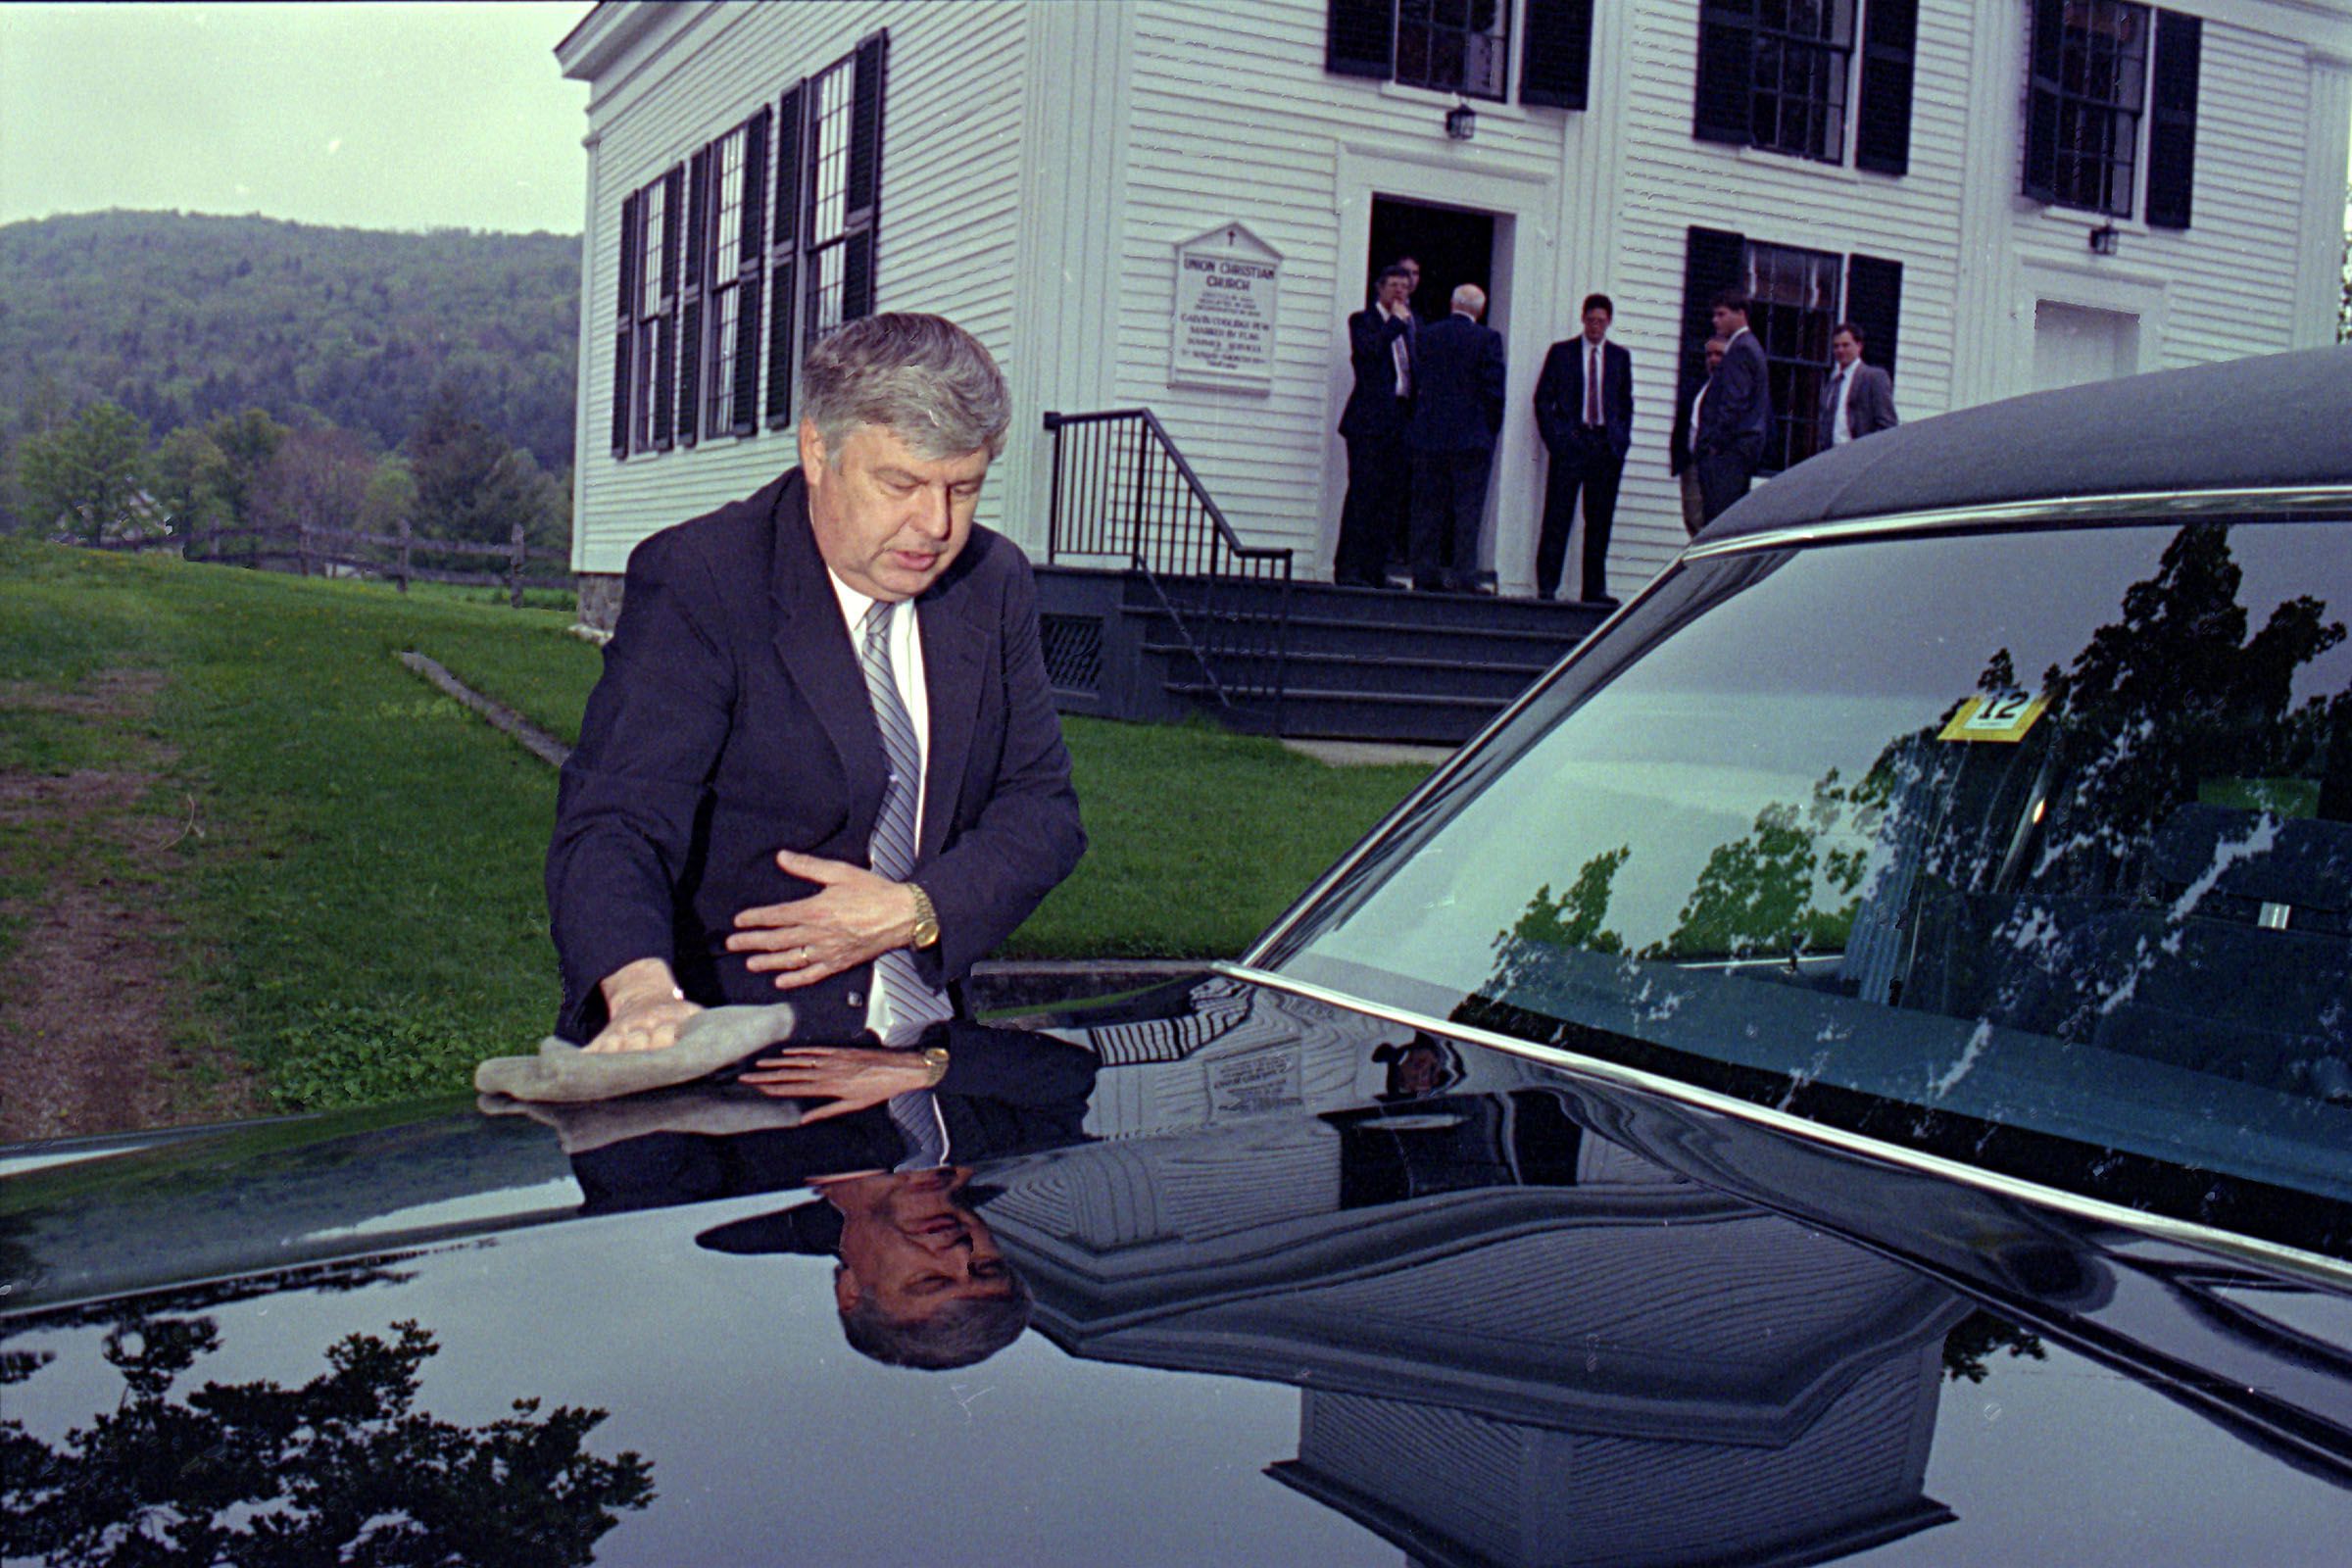 Dwight Camp dusts off the Cadillac hearse at a funeral held at Plymouth Notch, Vt., on May 20, 1993. Camp is amongst four generations who have owned Cabot Funeral Home in Woodstock. The life of a funeral director is not all somber and grim. "We cry with the people, but we laugh with them, too," he said. (Valley News - Medora Hebert) Copyright Valley News. May not be reprinted or used online without permission. Send requests to permission@vnews.com.